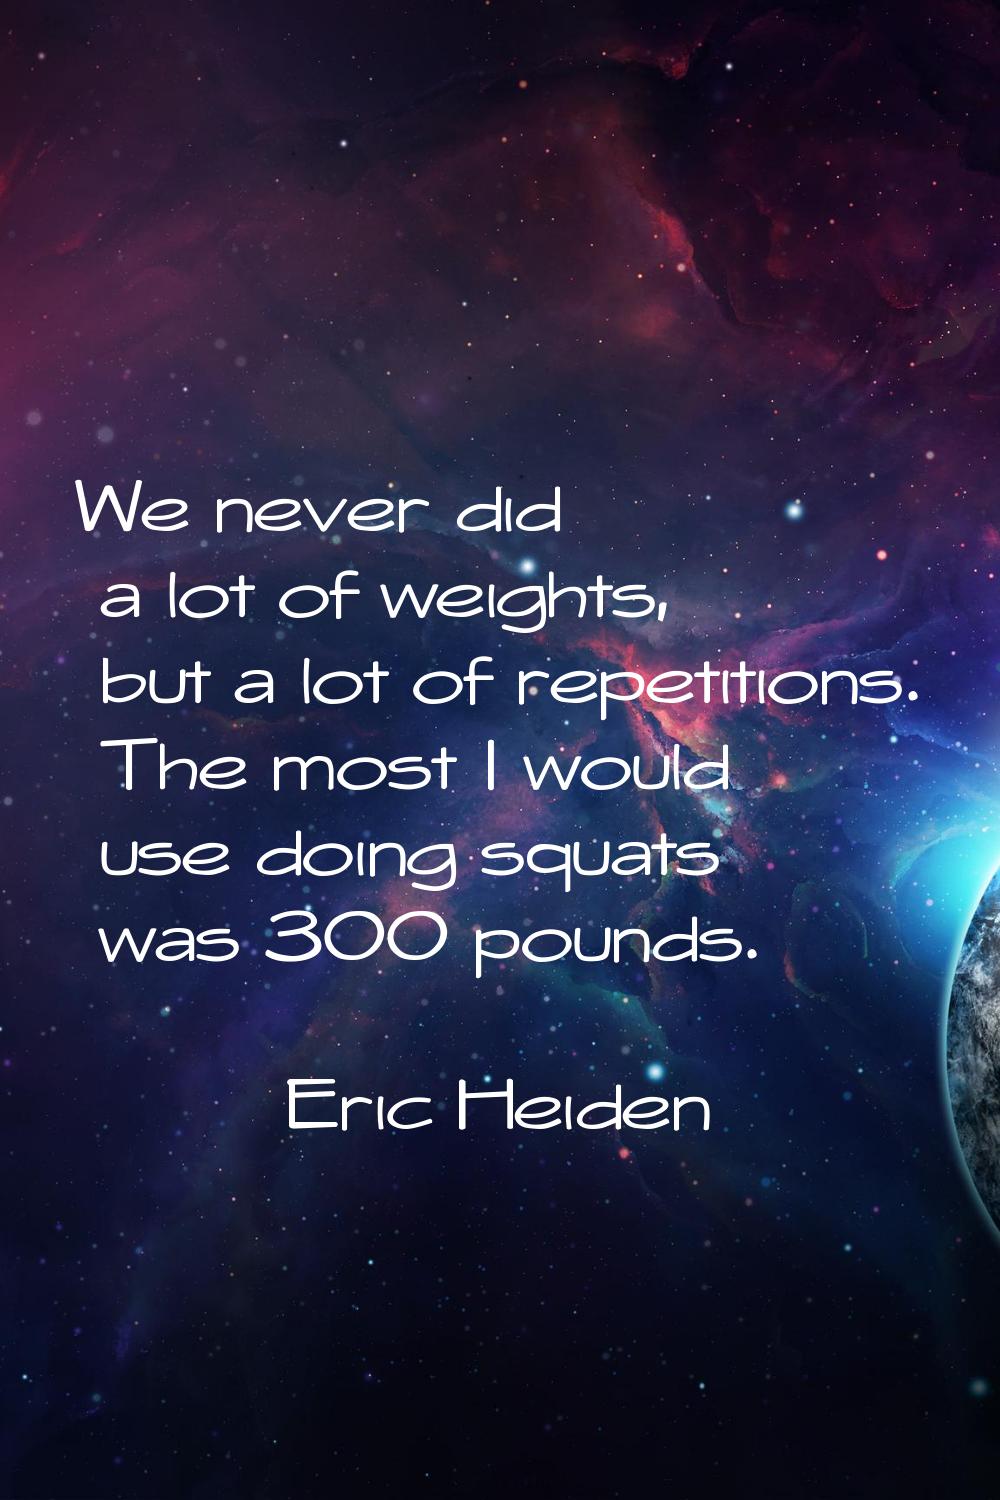 We never did a lot of weights, but a lot of repetitions. The most I would use doing squats was 300 